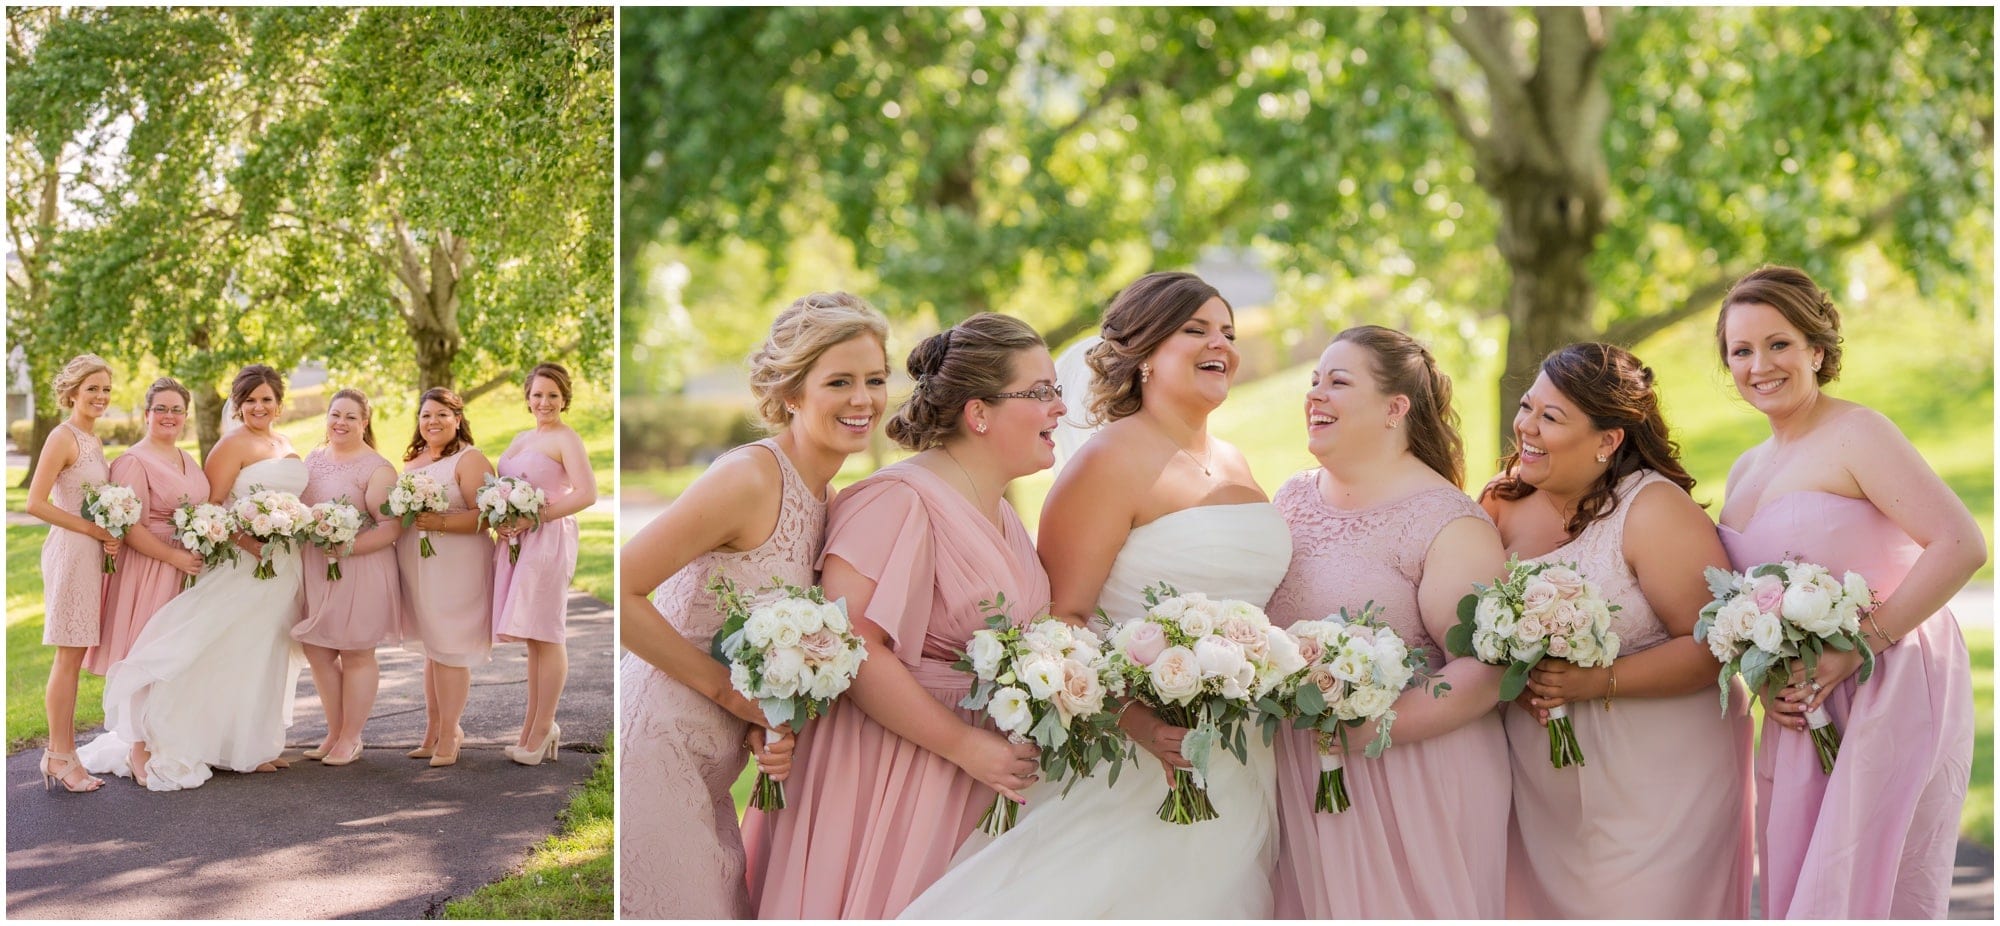 bride and bridesmaids laughing on the wedding day all wearing light pink short different dresses